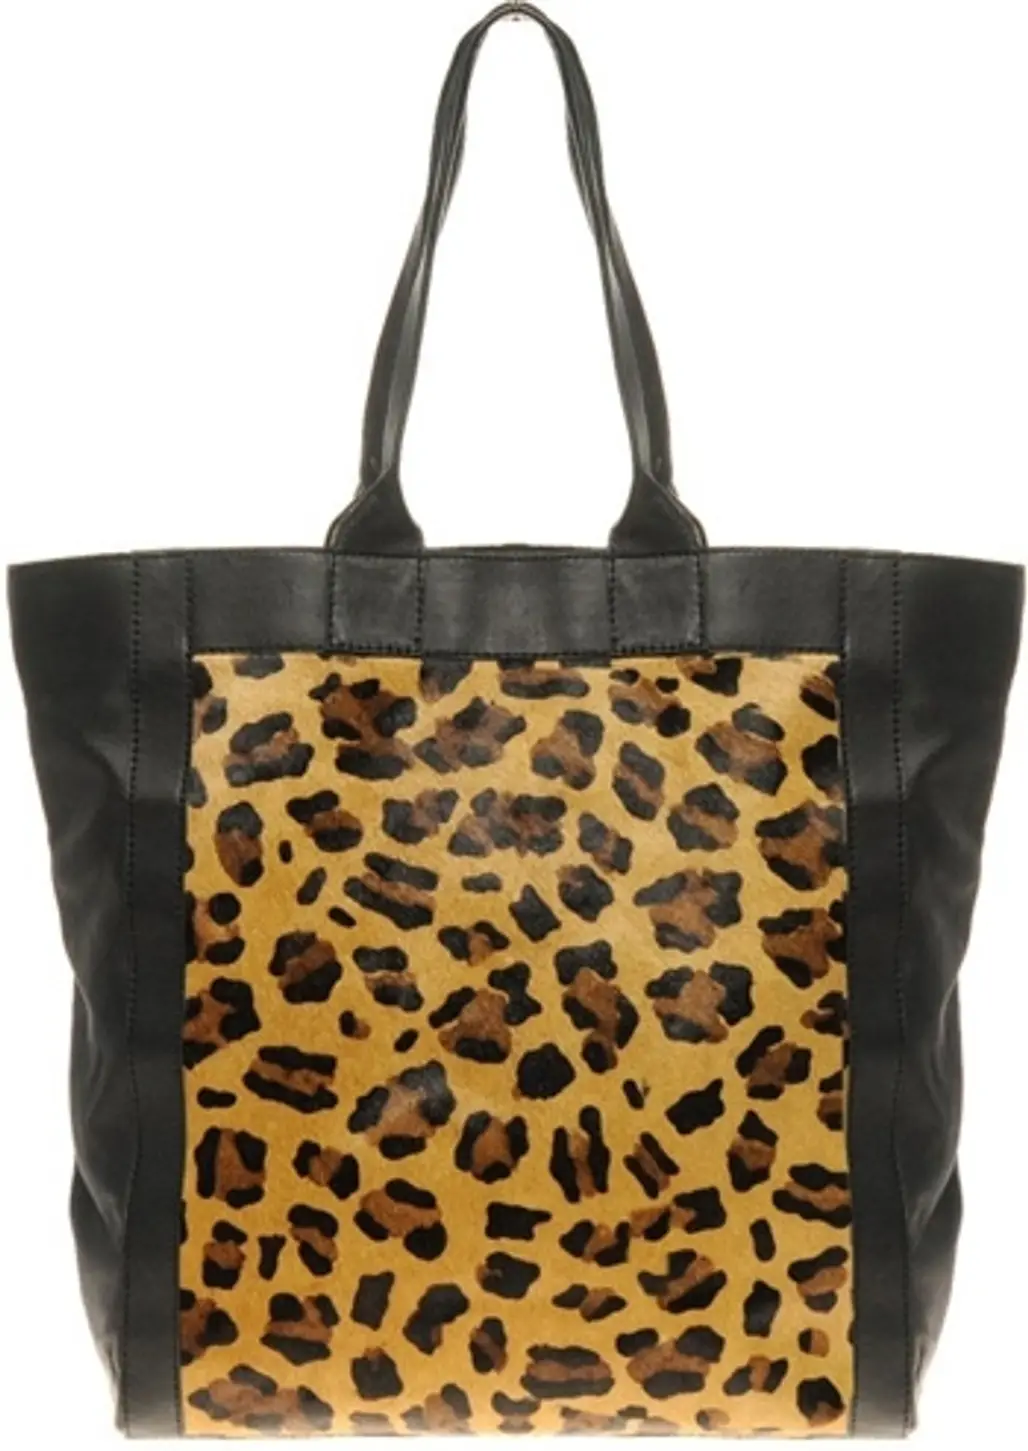 ASOS Limited Edition Leather Leopard Print Shopper